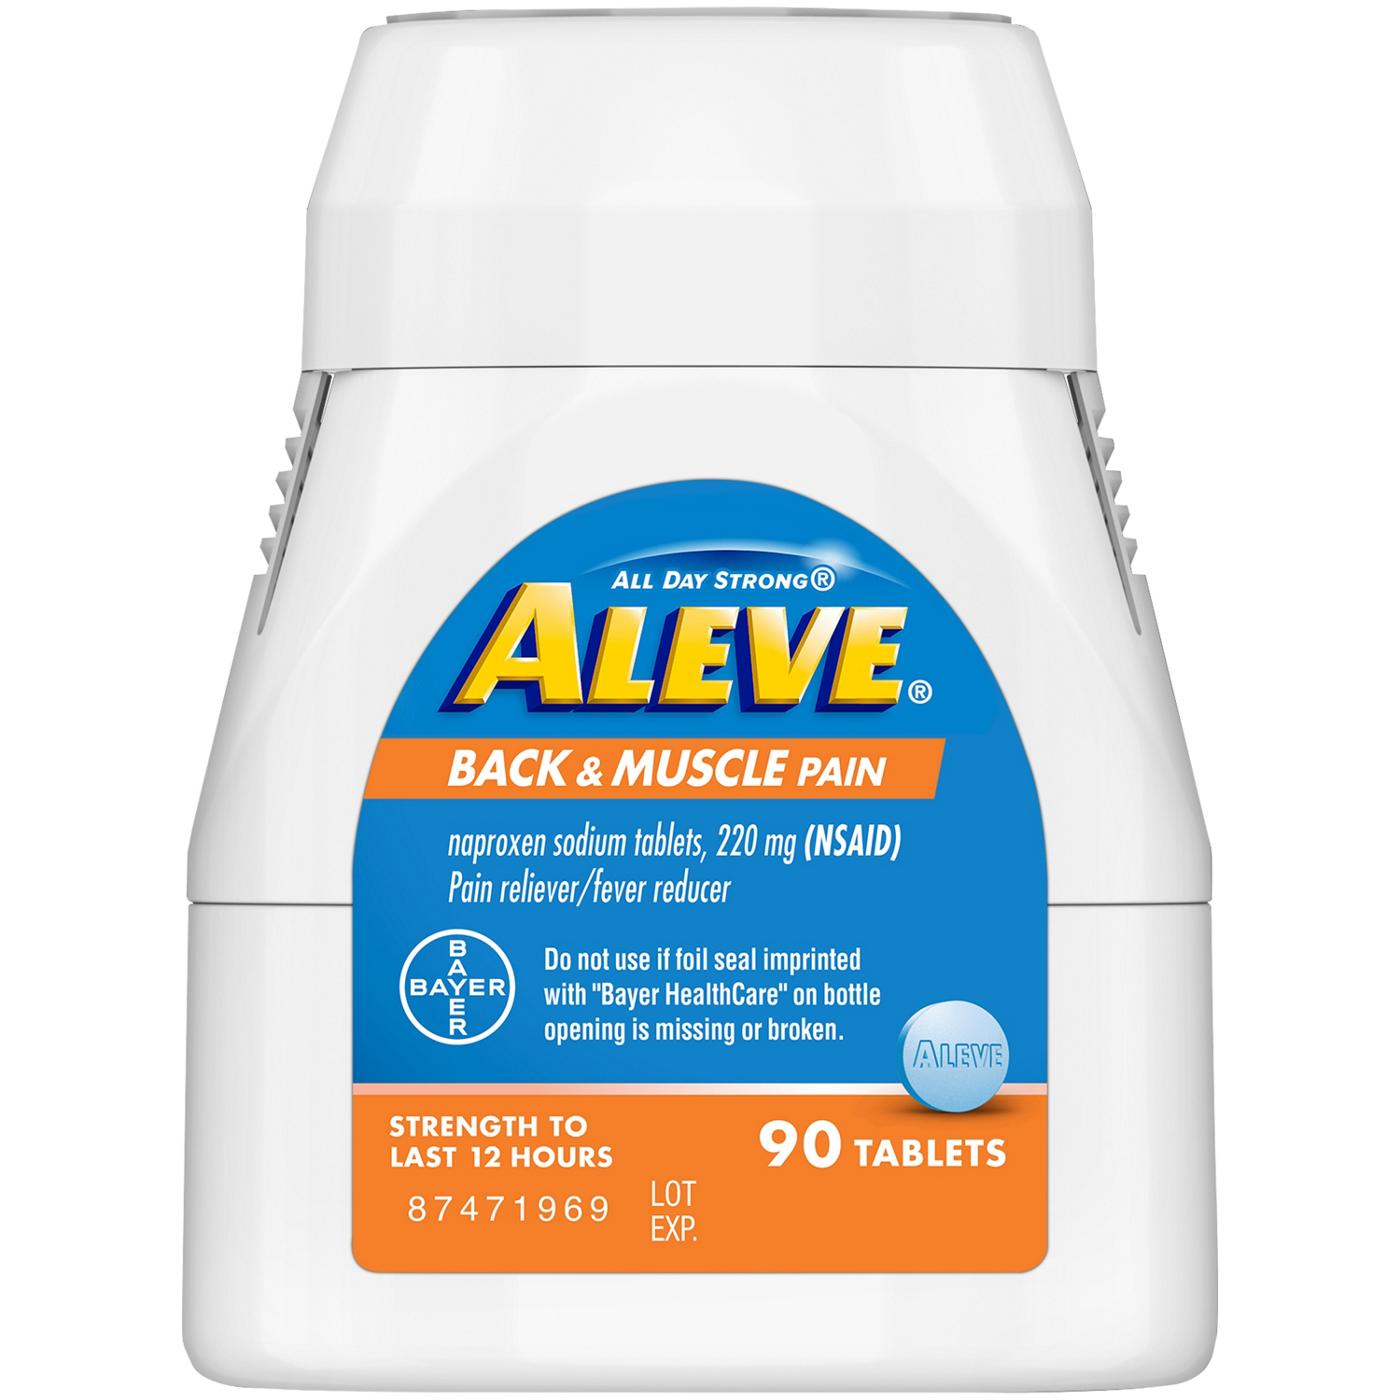 Aleve Back & Muscle Pain Naproxen 220mg Tablets; image 2 of 7